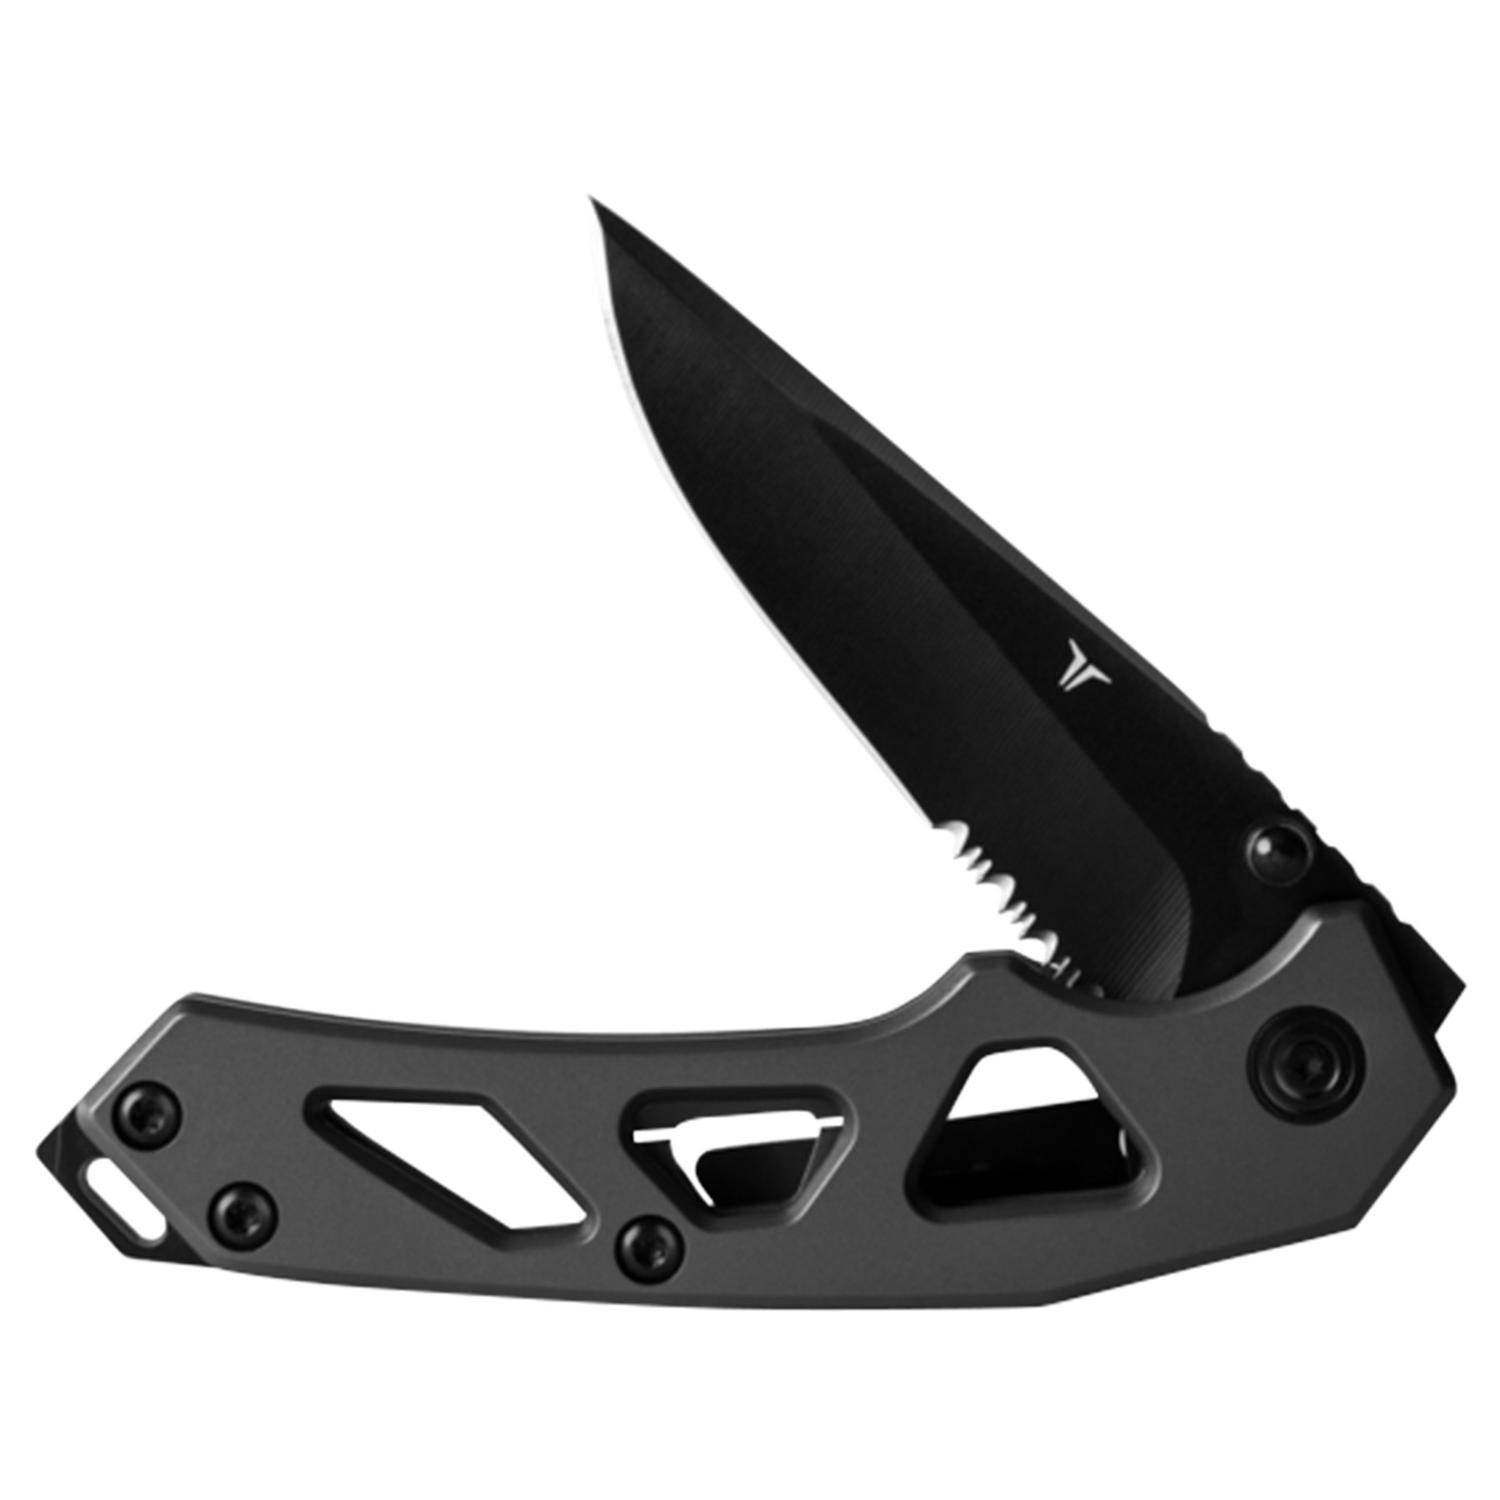 Photos - Other sporting goods Steel True Black/Gray 8CR13MOV Stainless  8 in. EDC Folding Knife TRU-FMK-0 